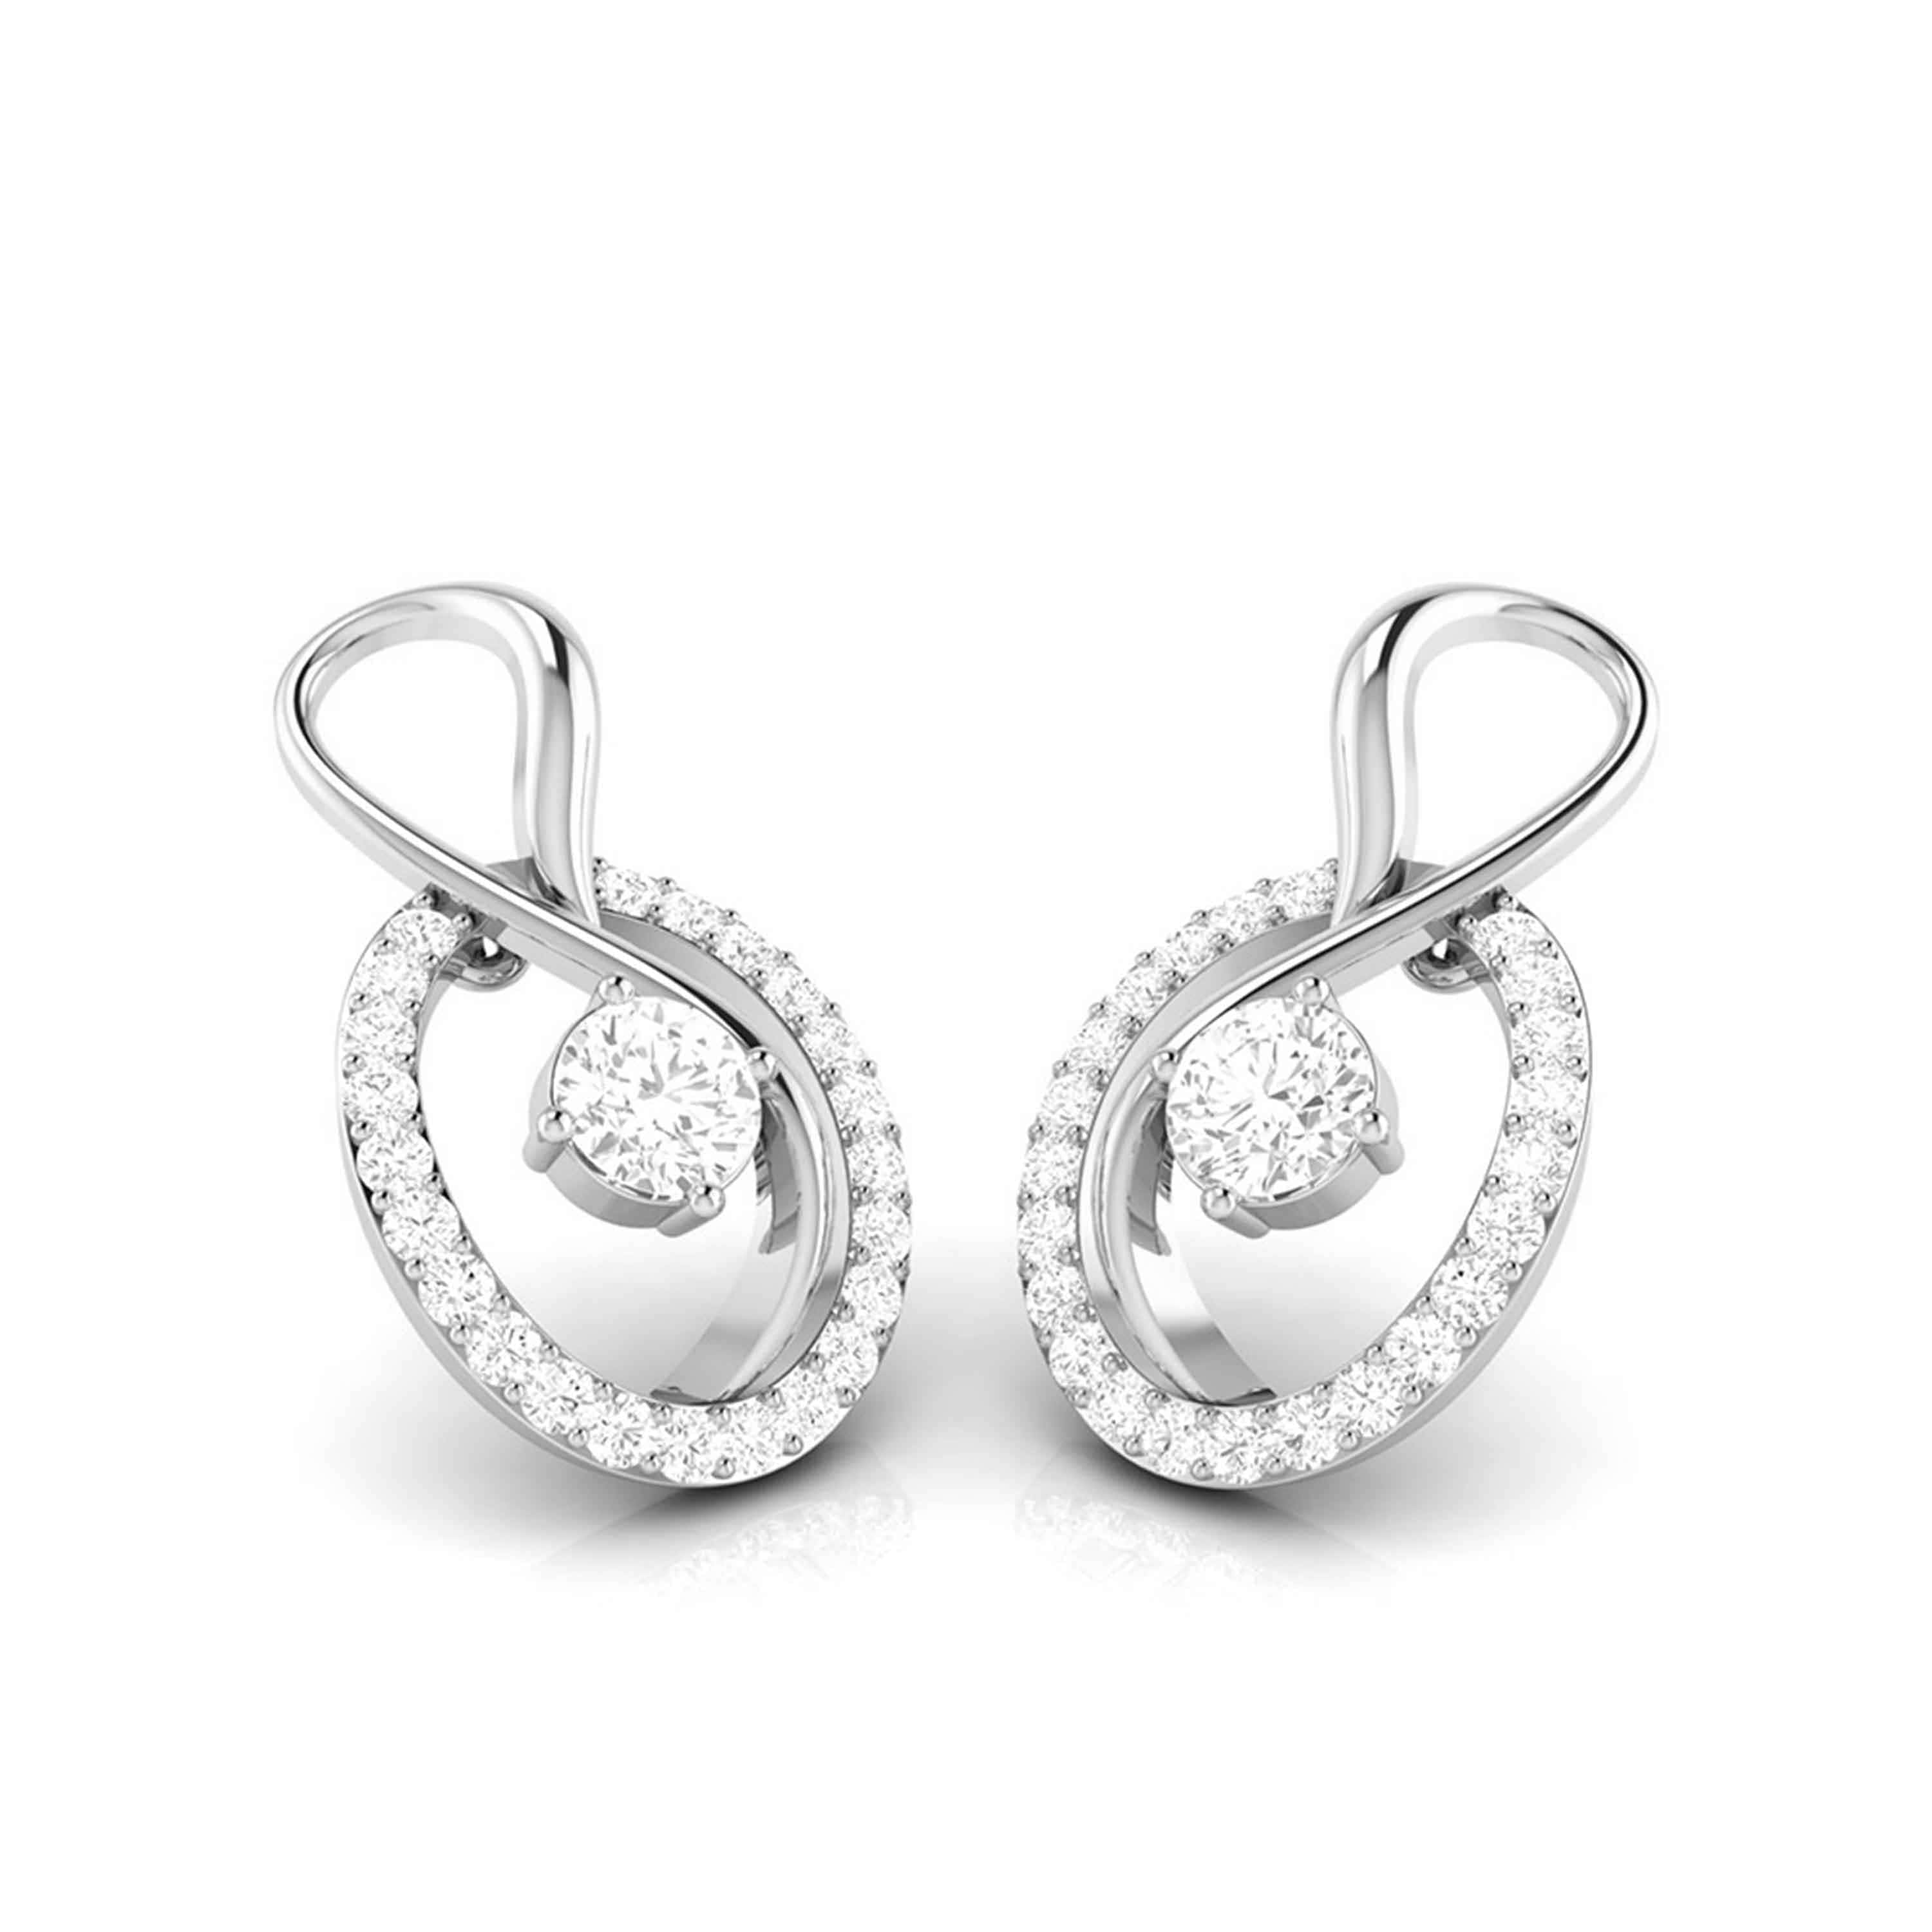 The Beliso Solitaire Earrings  Solitaire Diamond Earrings at Best Prices  in India  SarvadaJewelscom